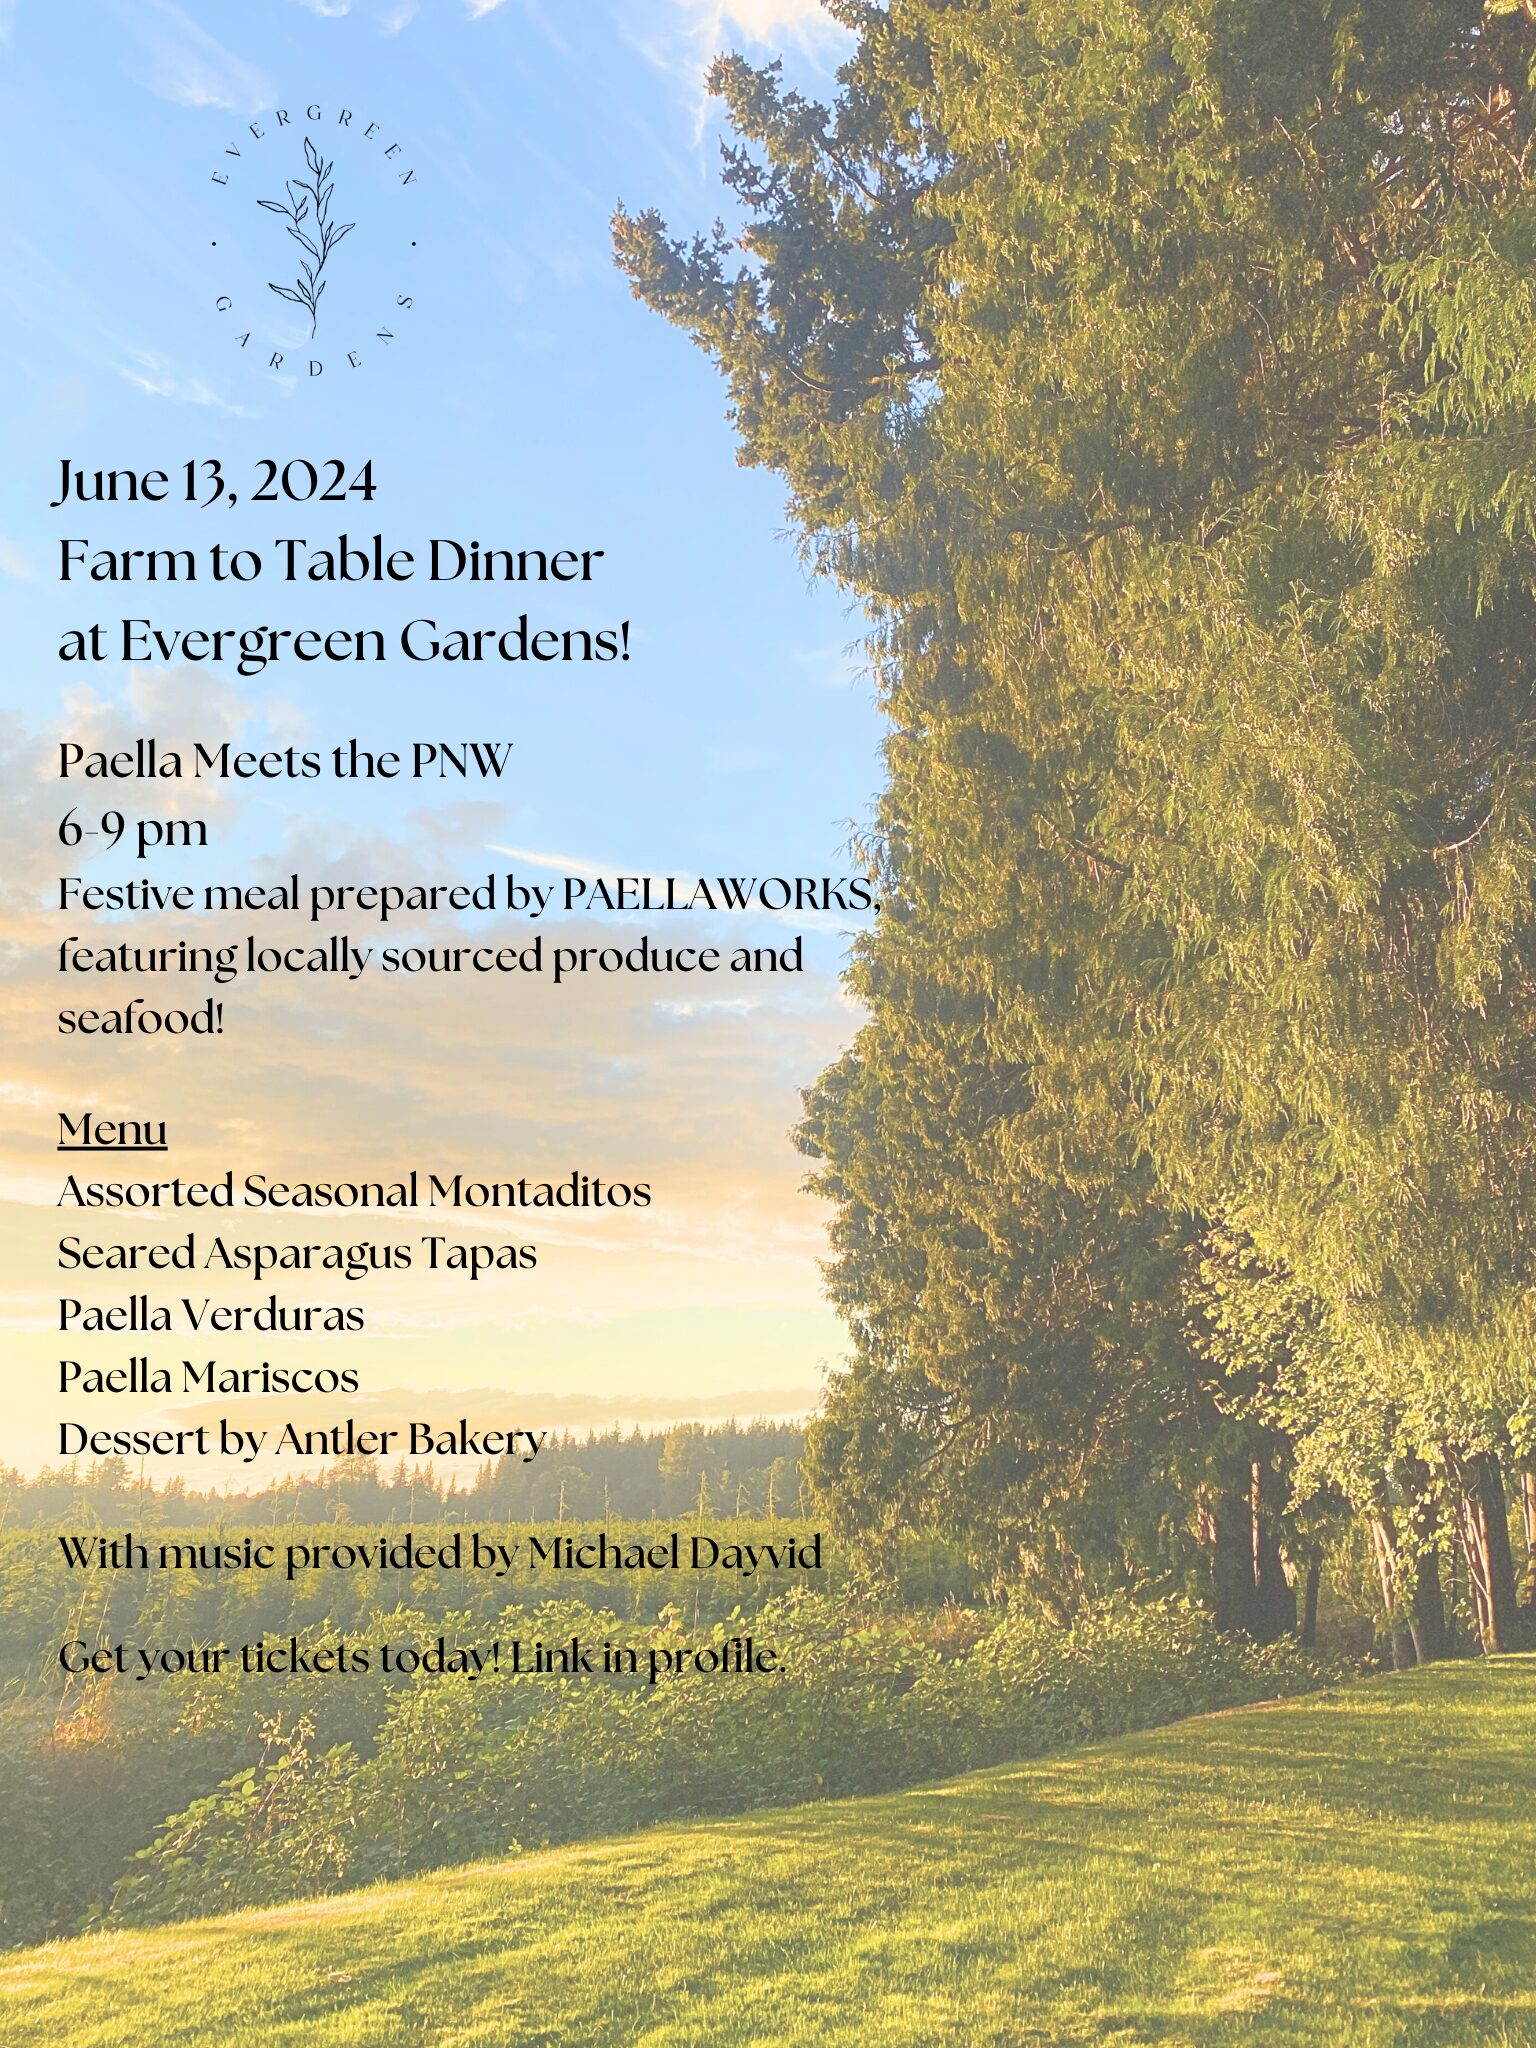 Evergreen gardens farm to table dinner information text on image